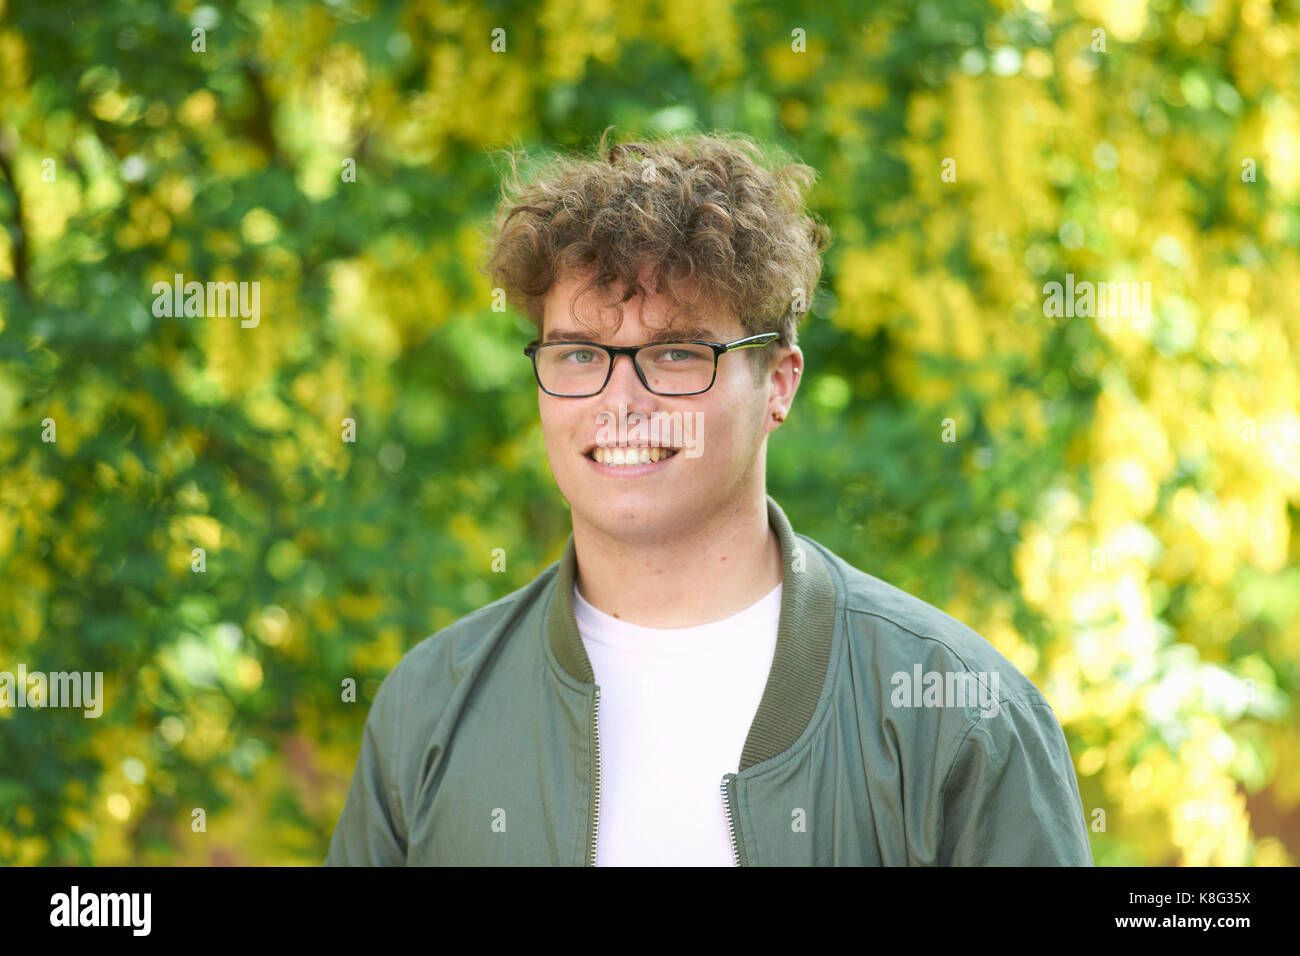 Portrait of curly haired young man looking at camera smiling Stock Photo